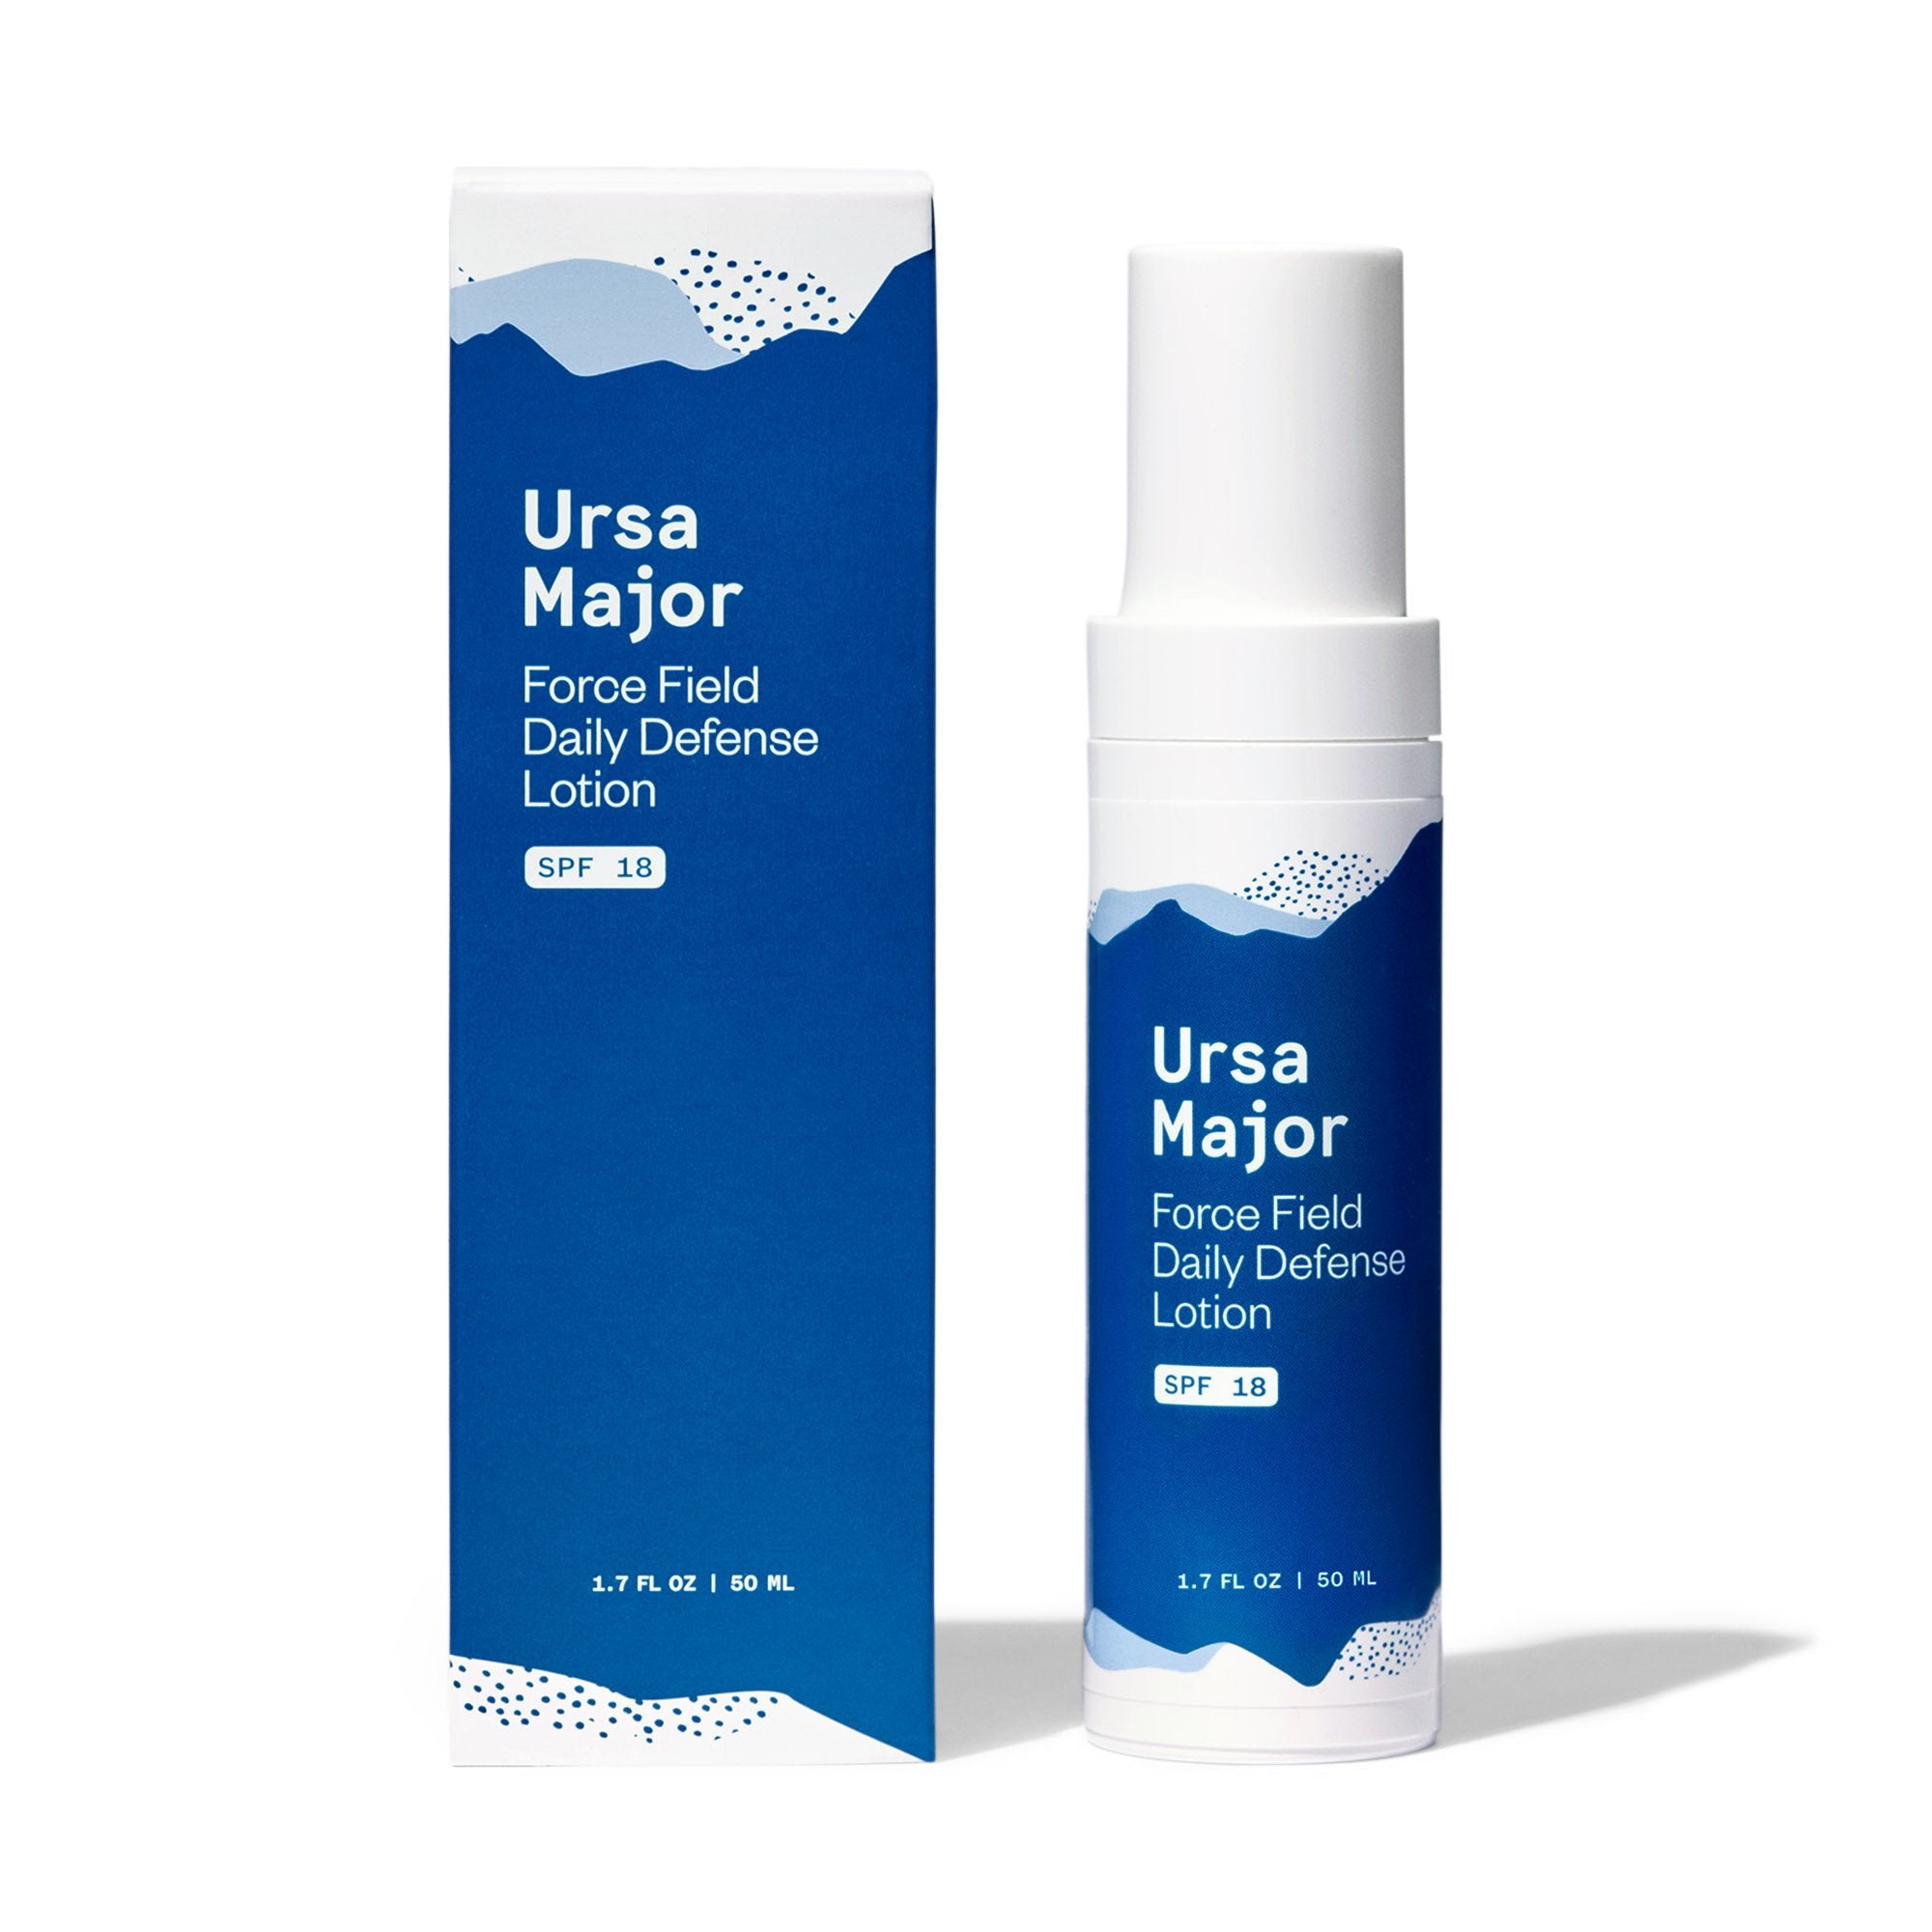 Ursa Major Force Field Daily Defence Lotion